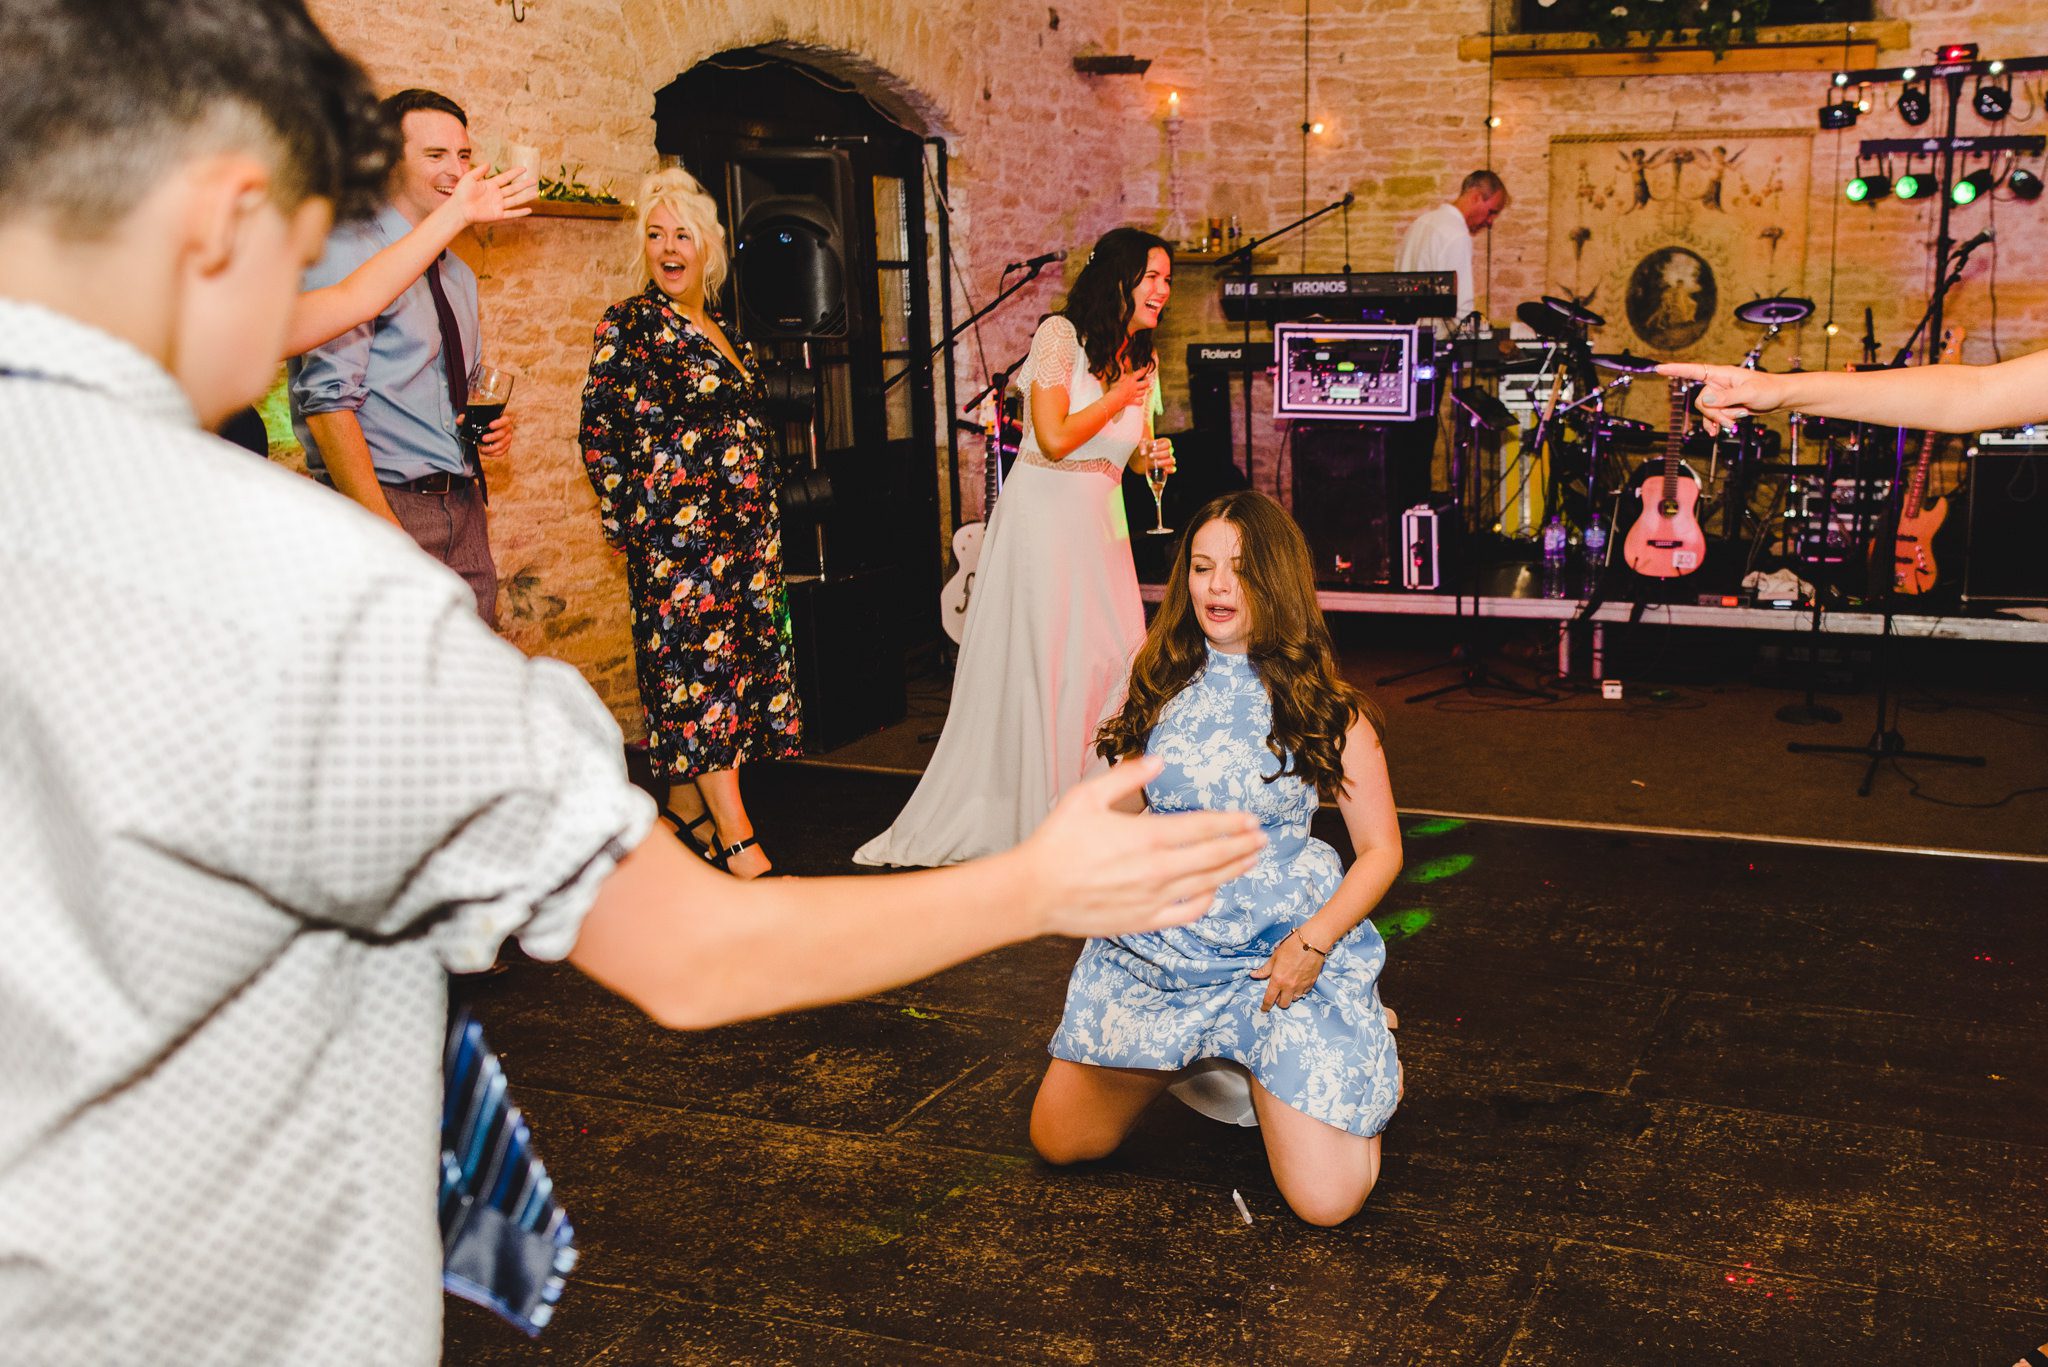 A wedding guest dancing in Gloucestershire